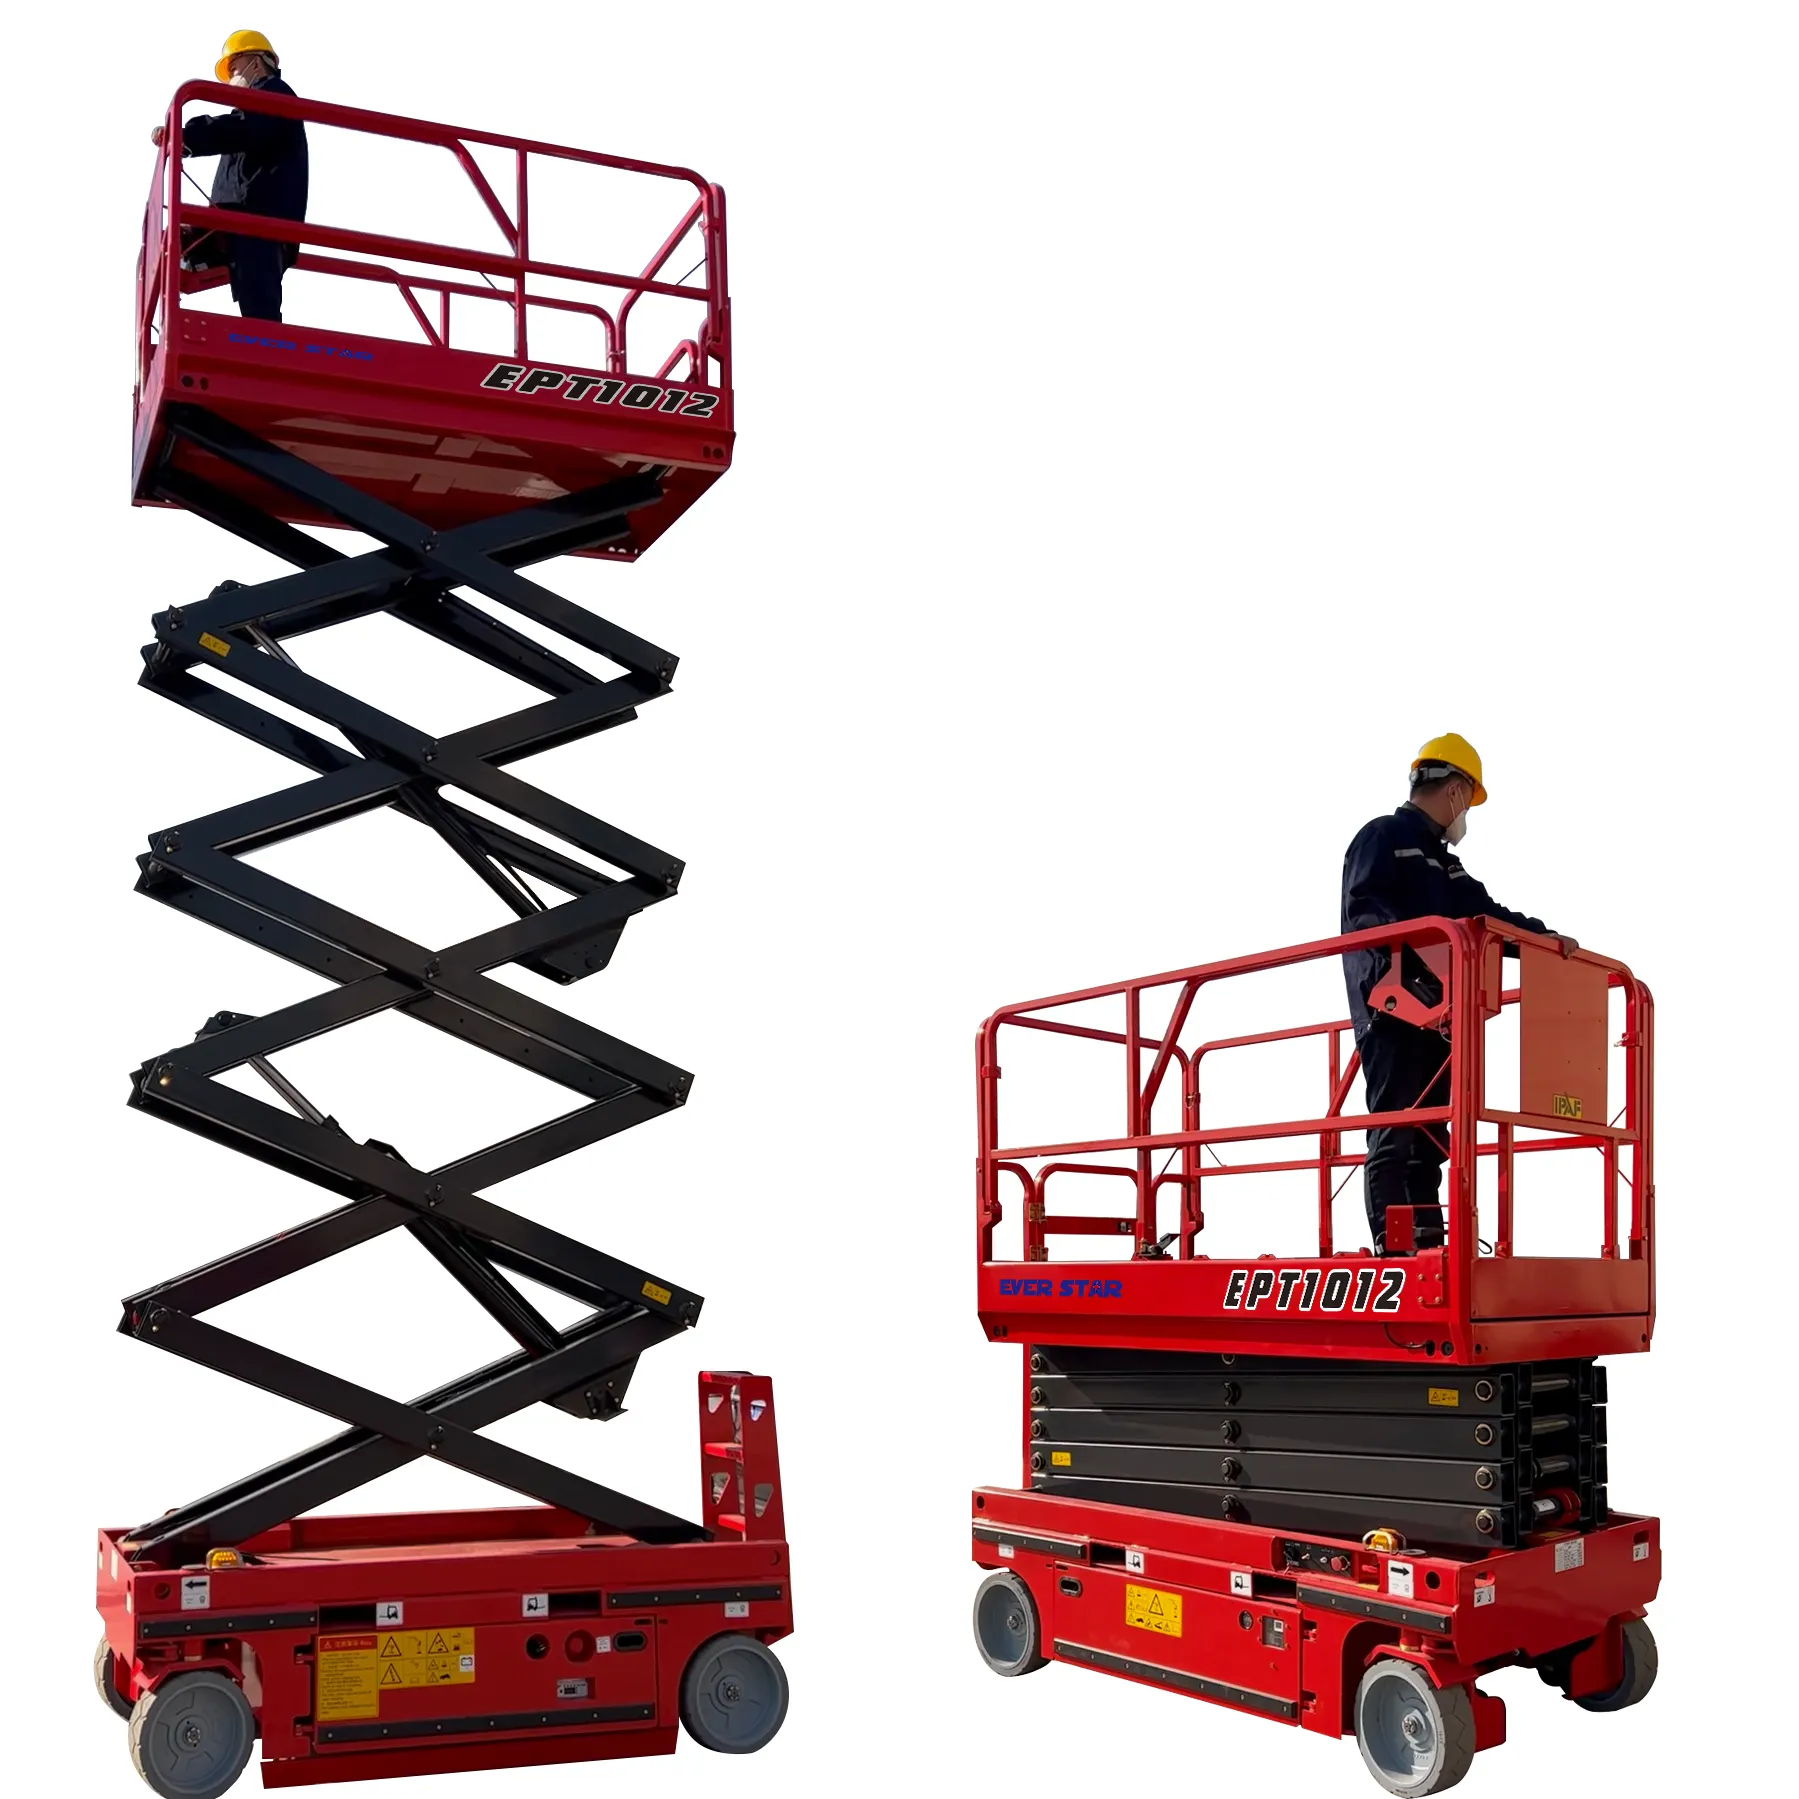 Fixed scissor lifting platform hydraulic cargo lifter tables for warehouse factory